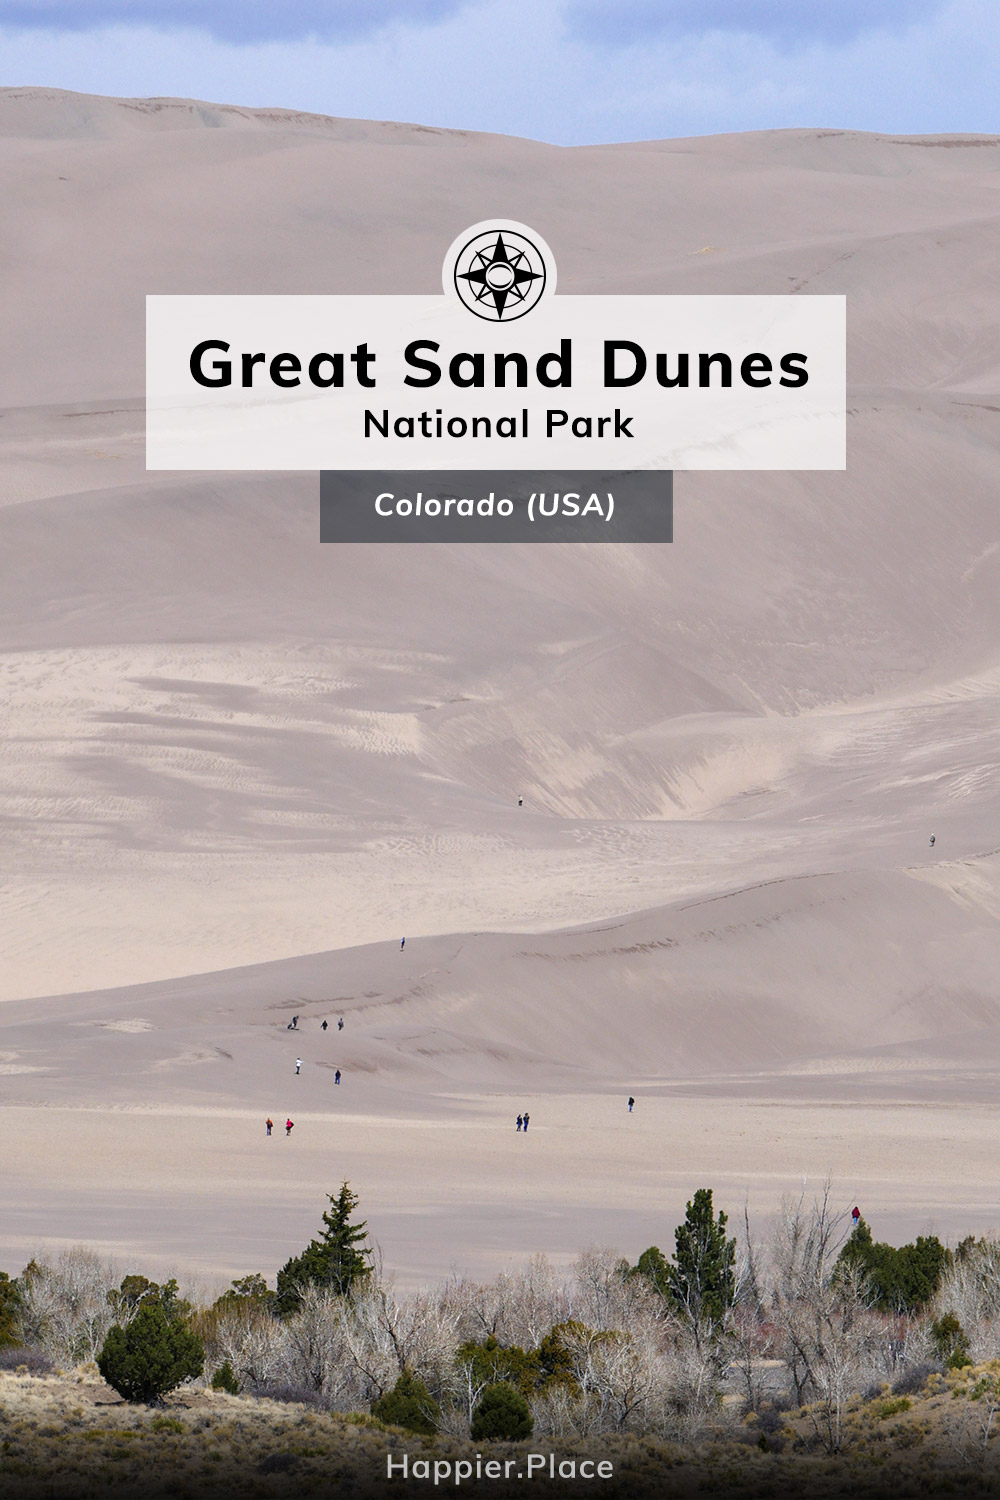 People hiking, sledding, snowboarding the Great Sand Dunes National Park Colorado Happier Place